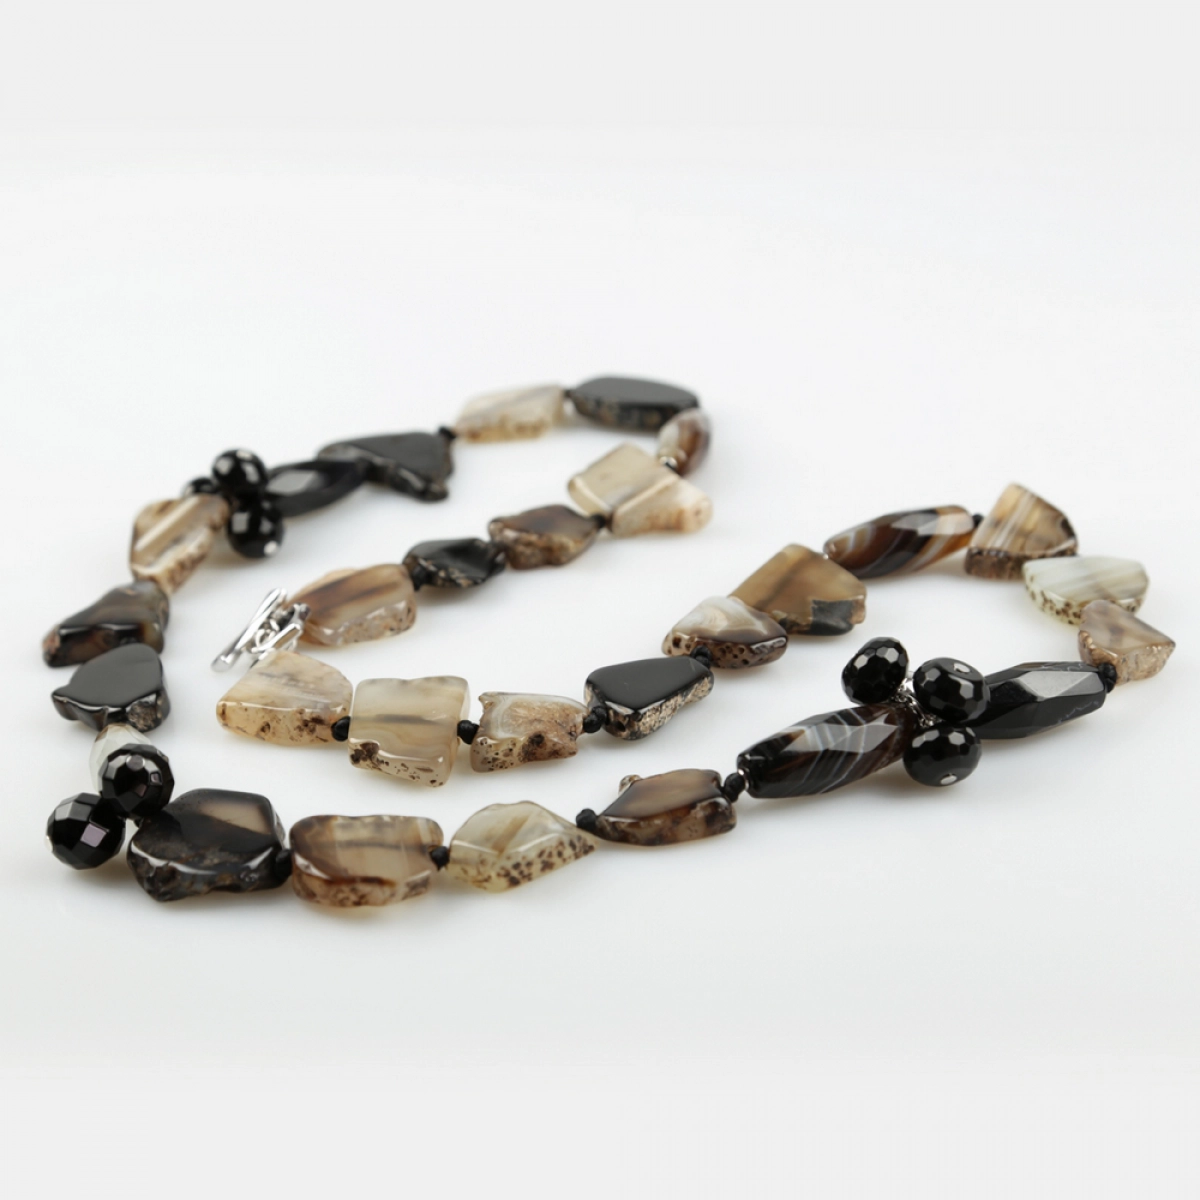 LONG NECKLACE AGATE AND NATURAL ONYX BUC256 PATRICIA GARCIA